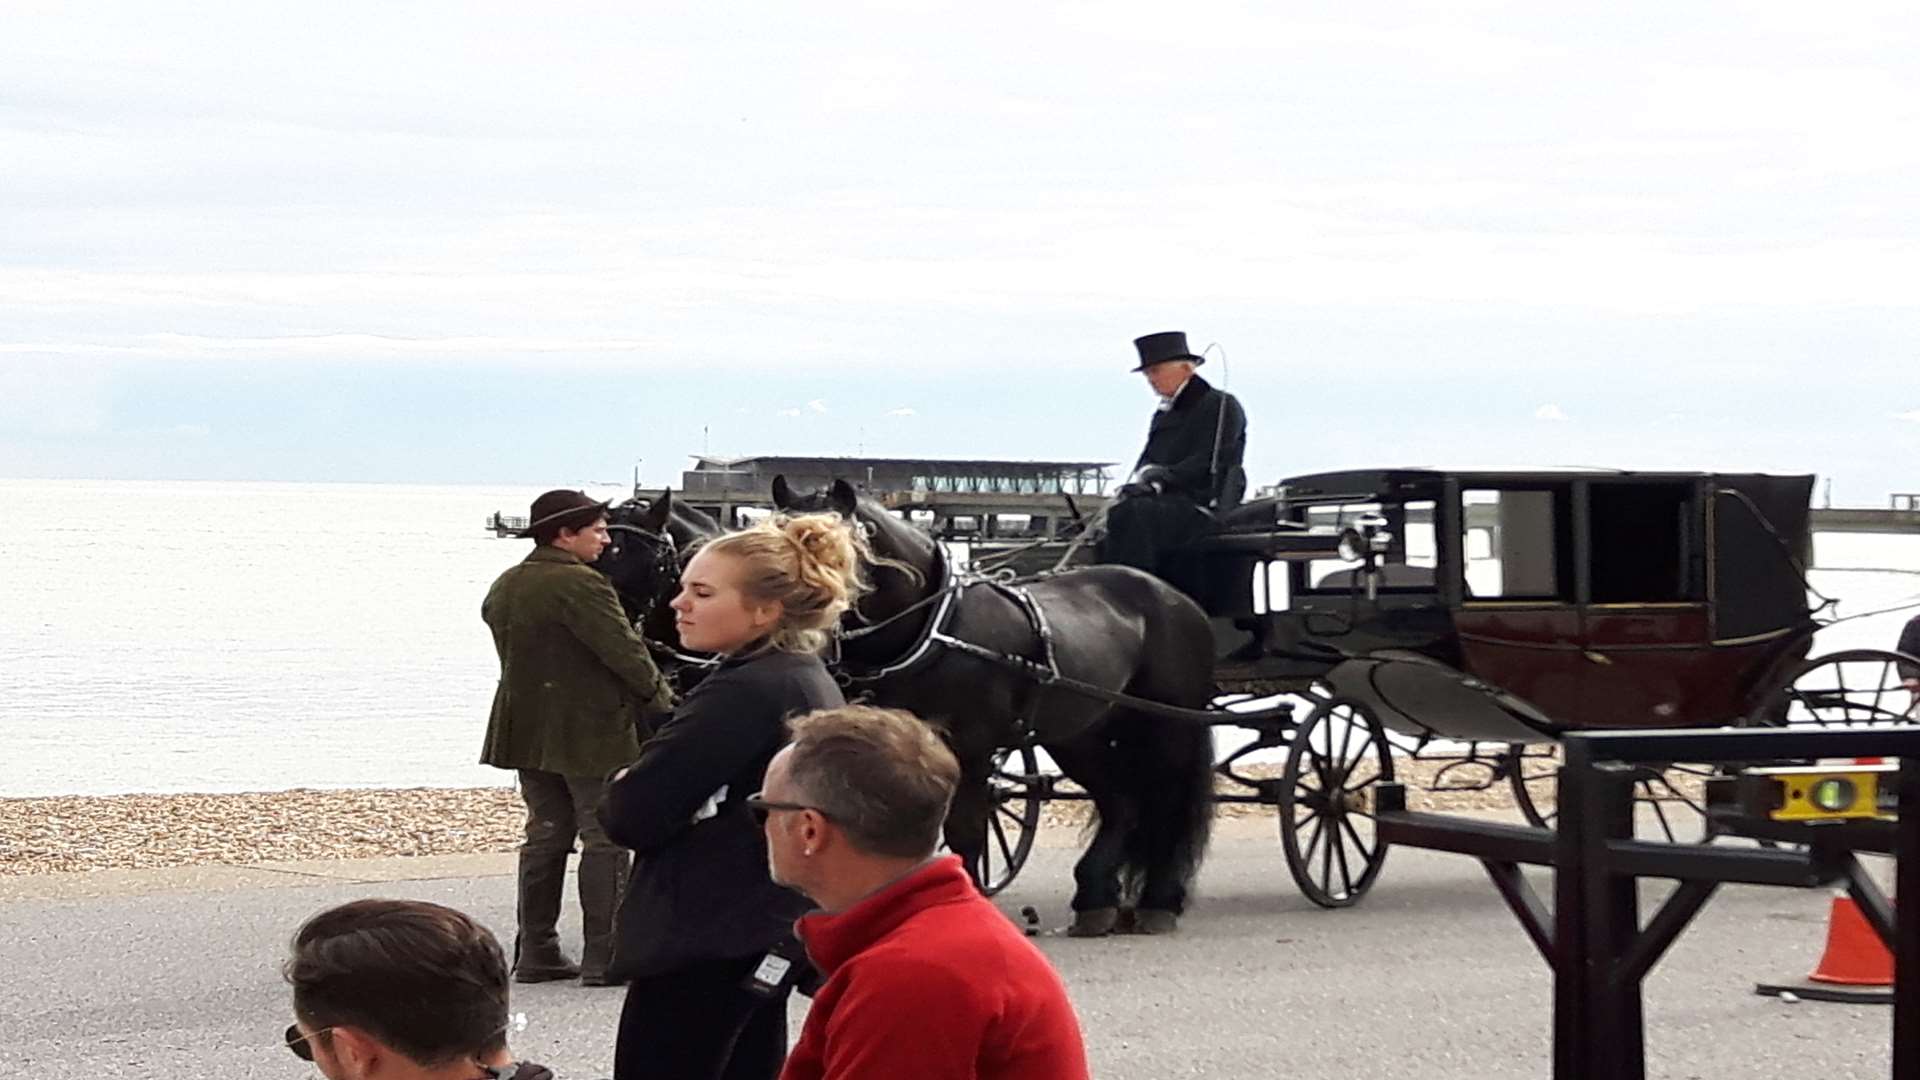 Two black horses are also on set